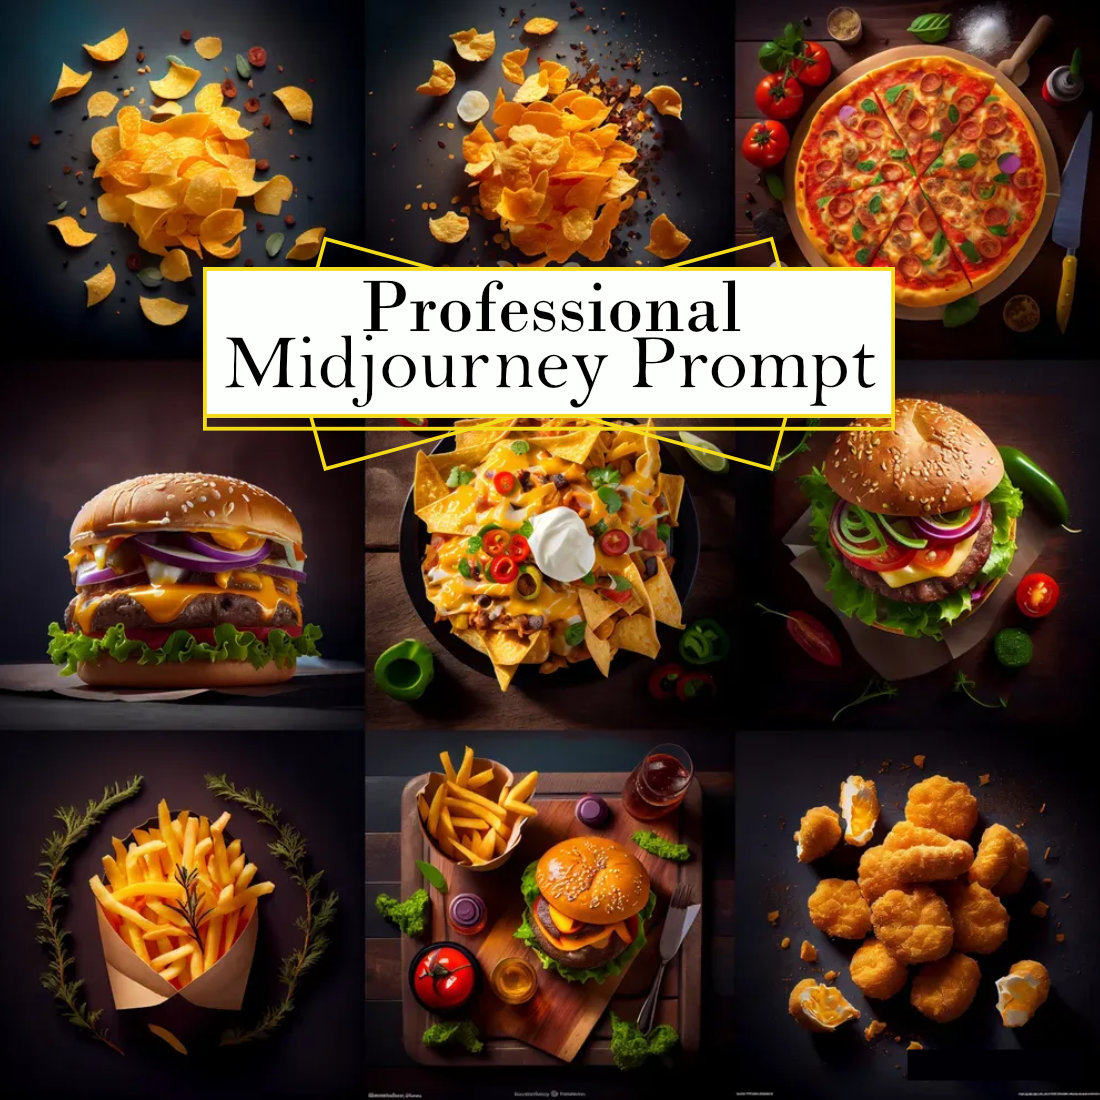 Realistic Fast Food Photographs Midjourney Prompt cover image.